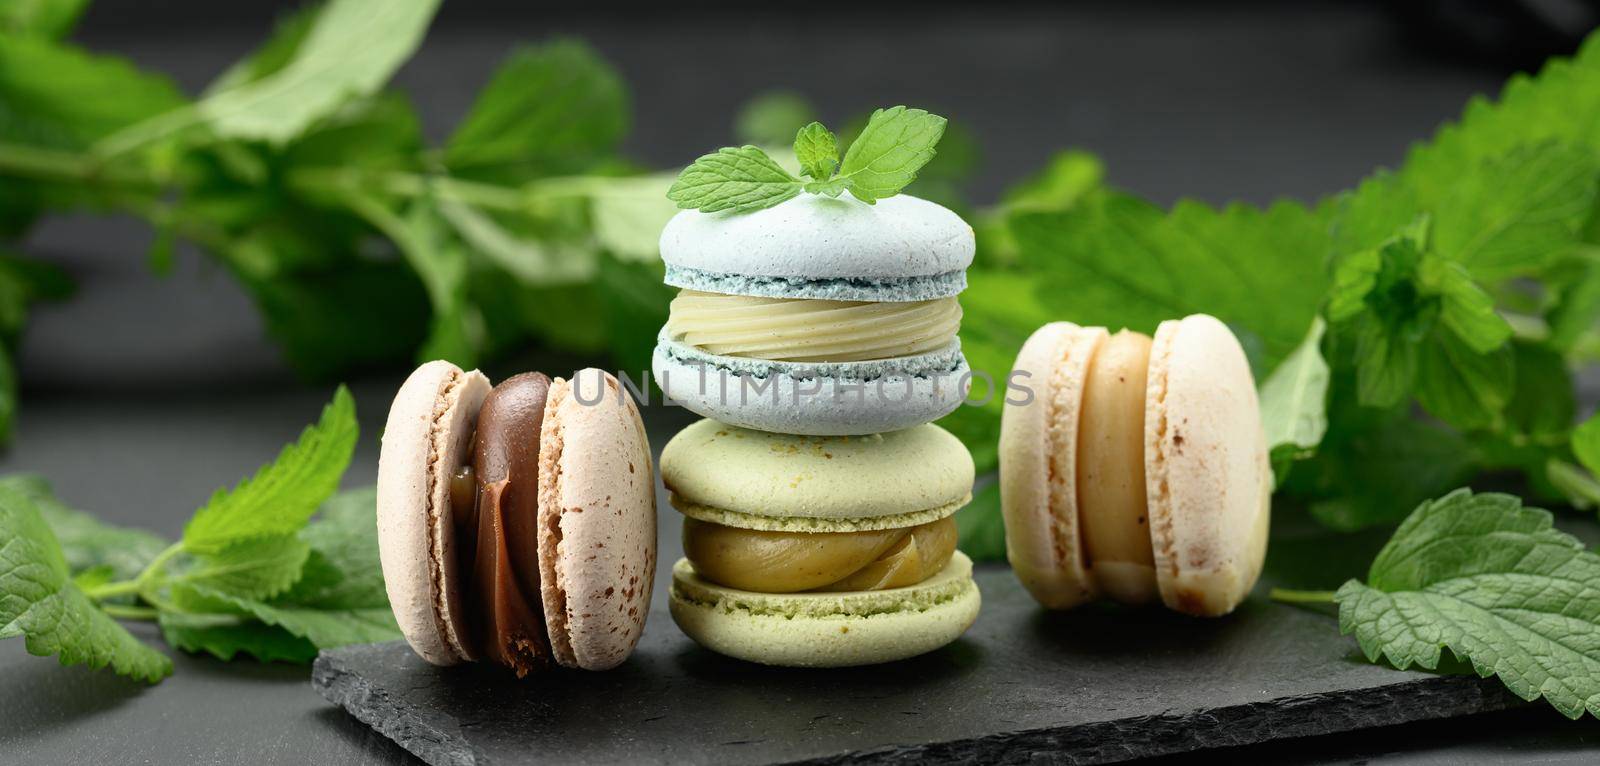 a stack of multi-colored macarons on a black background, behind green sprigs of mint, a delicious and exquisite dessert, banner